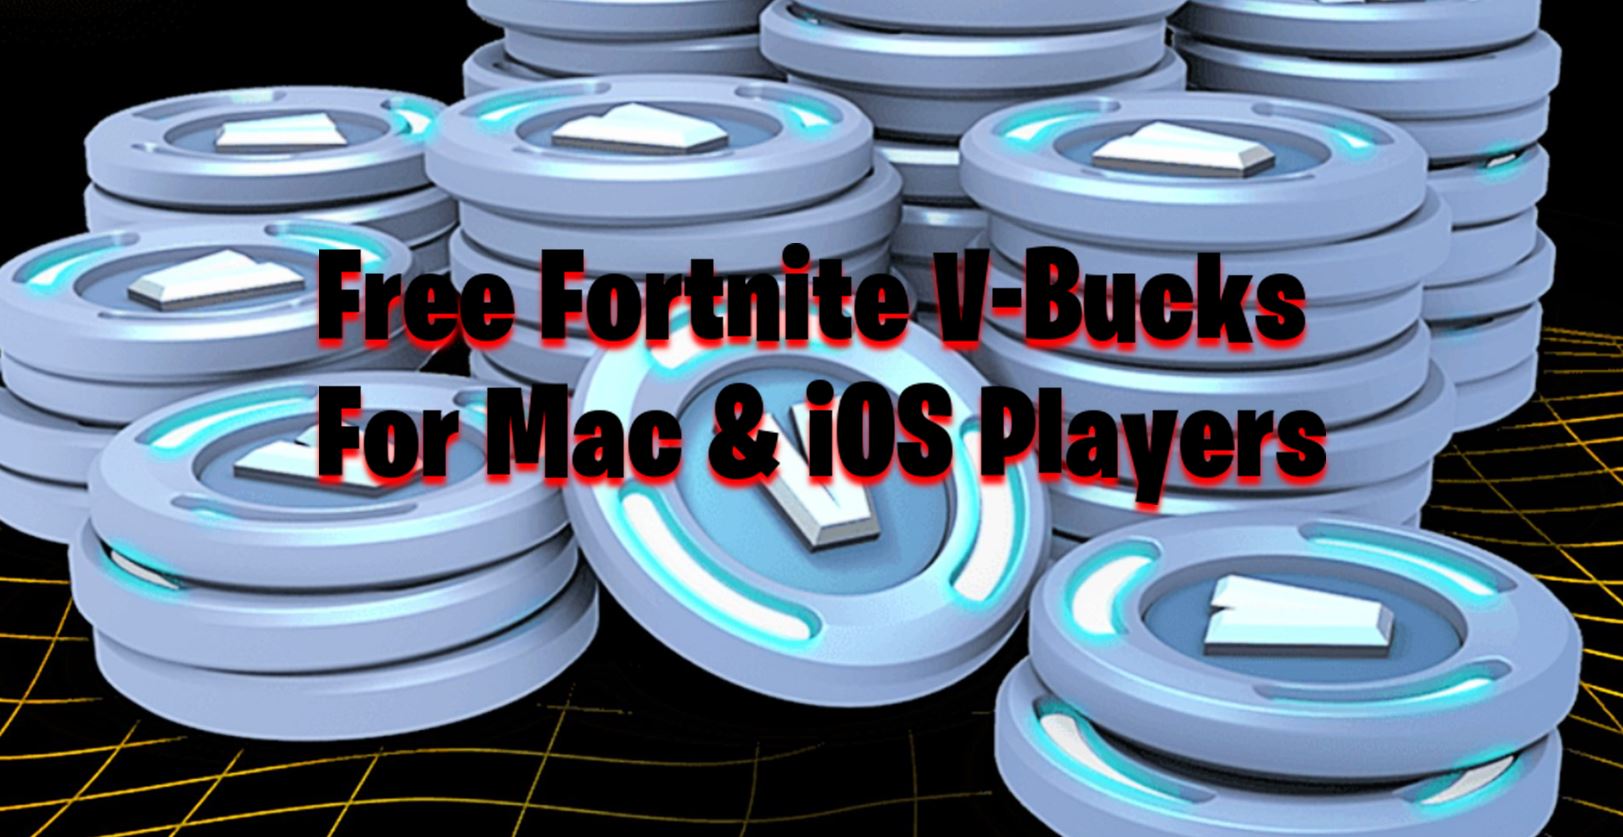 do you have to pay for fortnite on mac